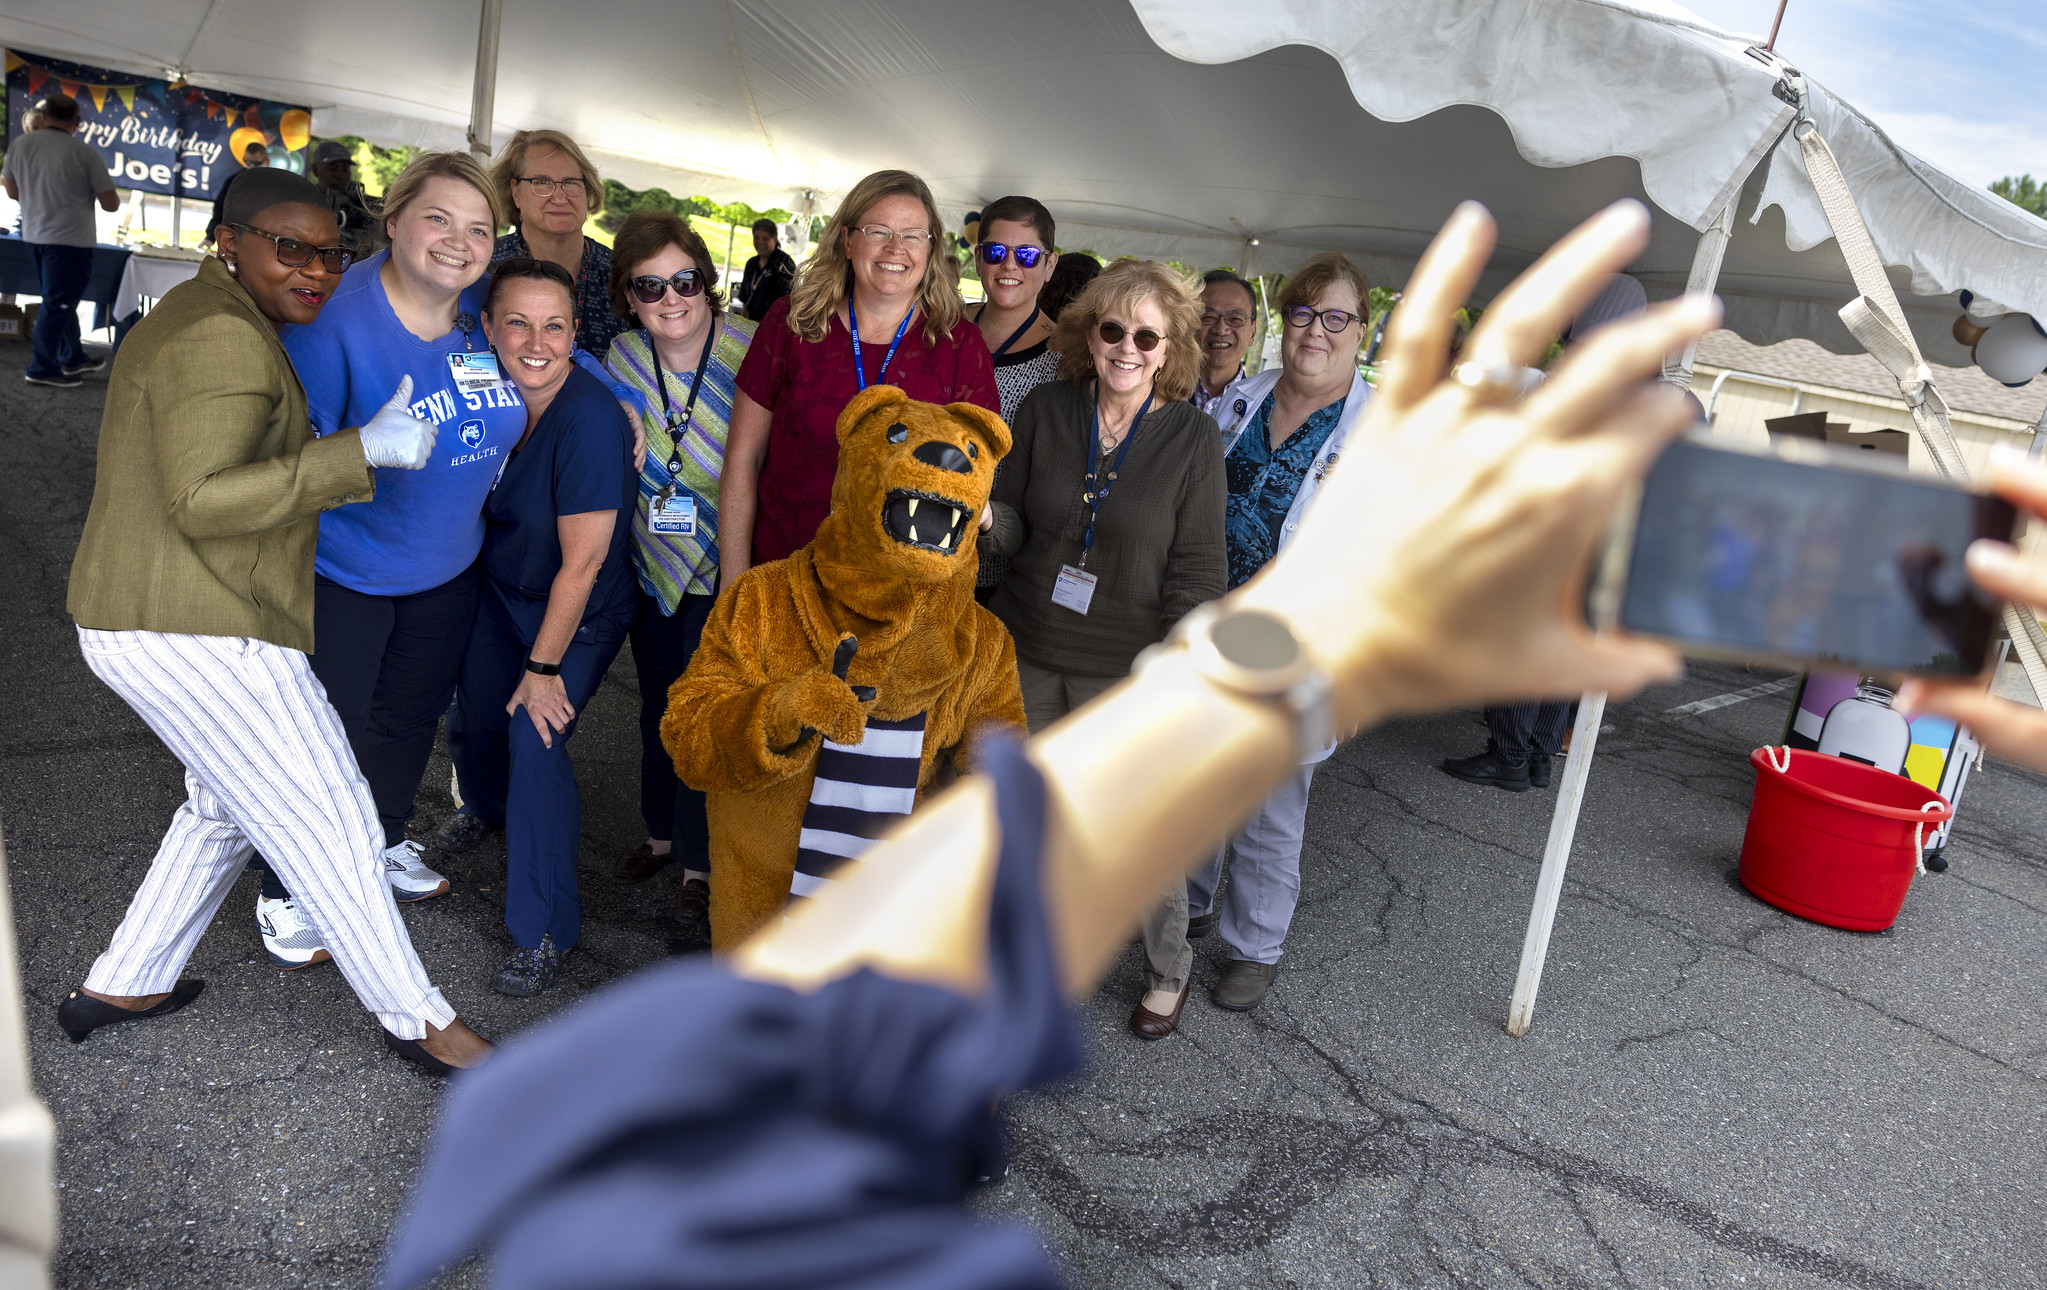 A group of about 10 people pose for a photo with the Penn State Nittany Lion underneath an outdoor event tent.